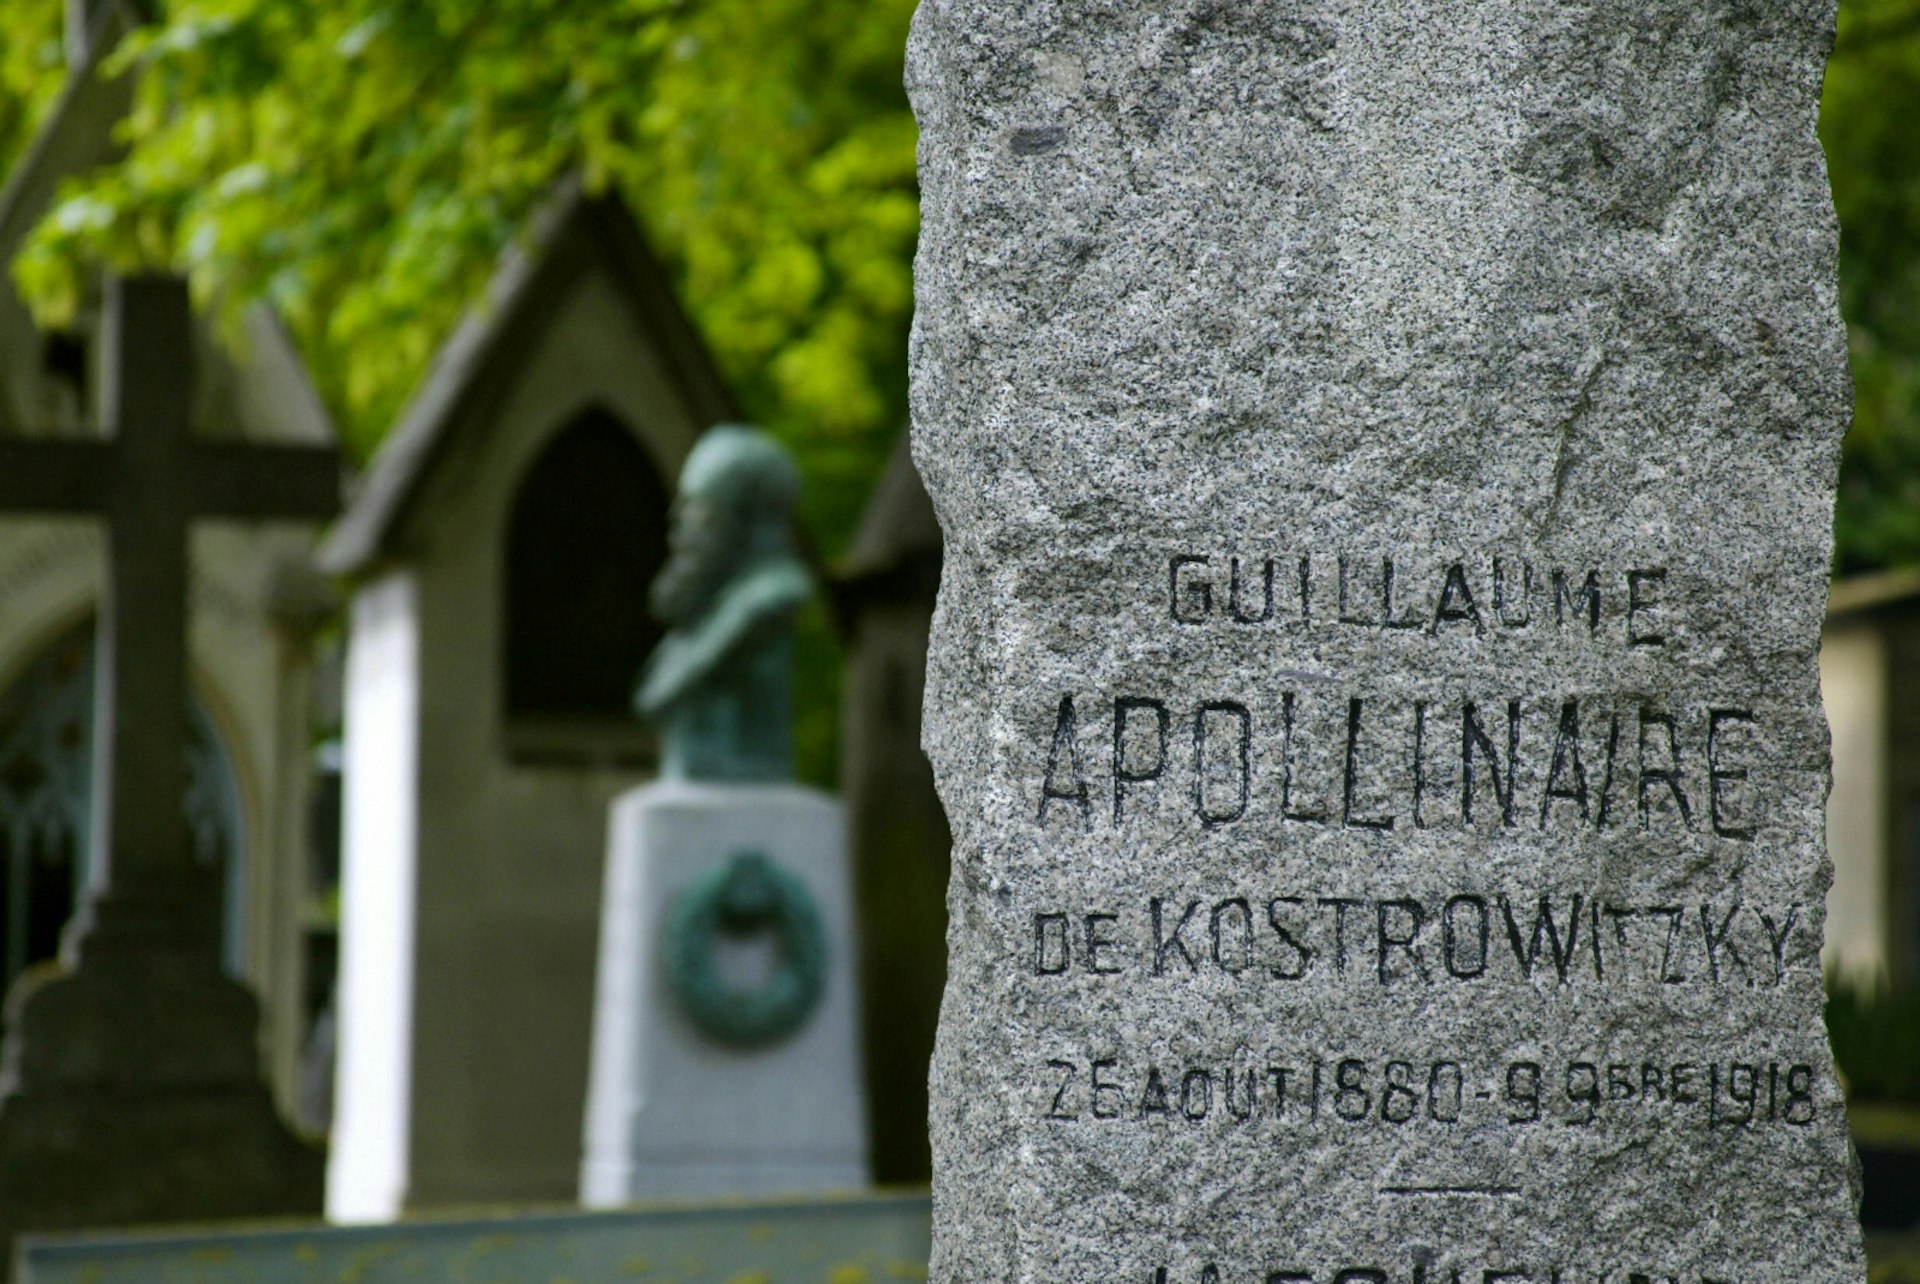 The gravestone of French poet Guillaume Apollinaire